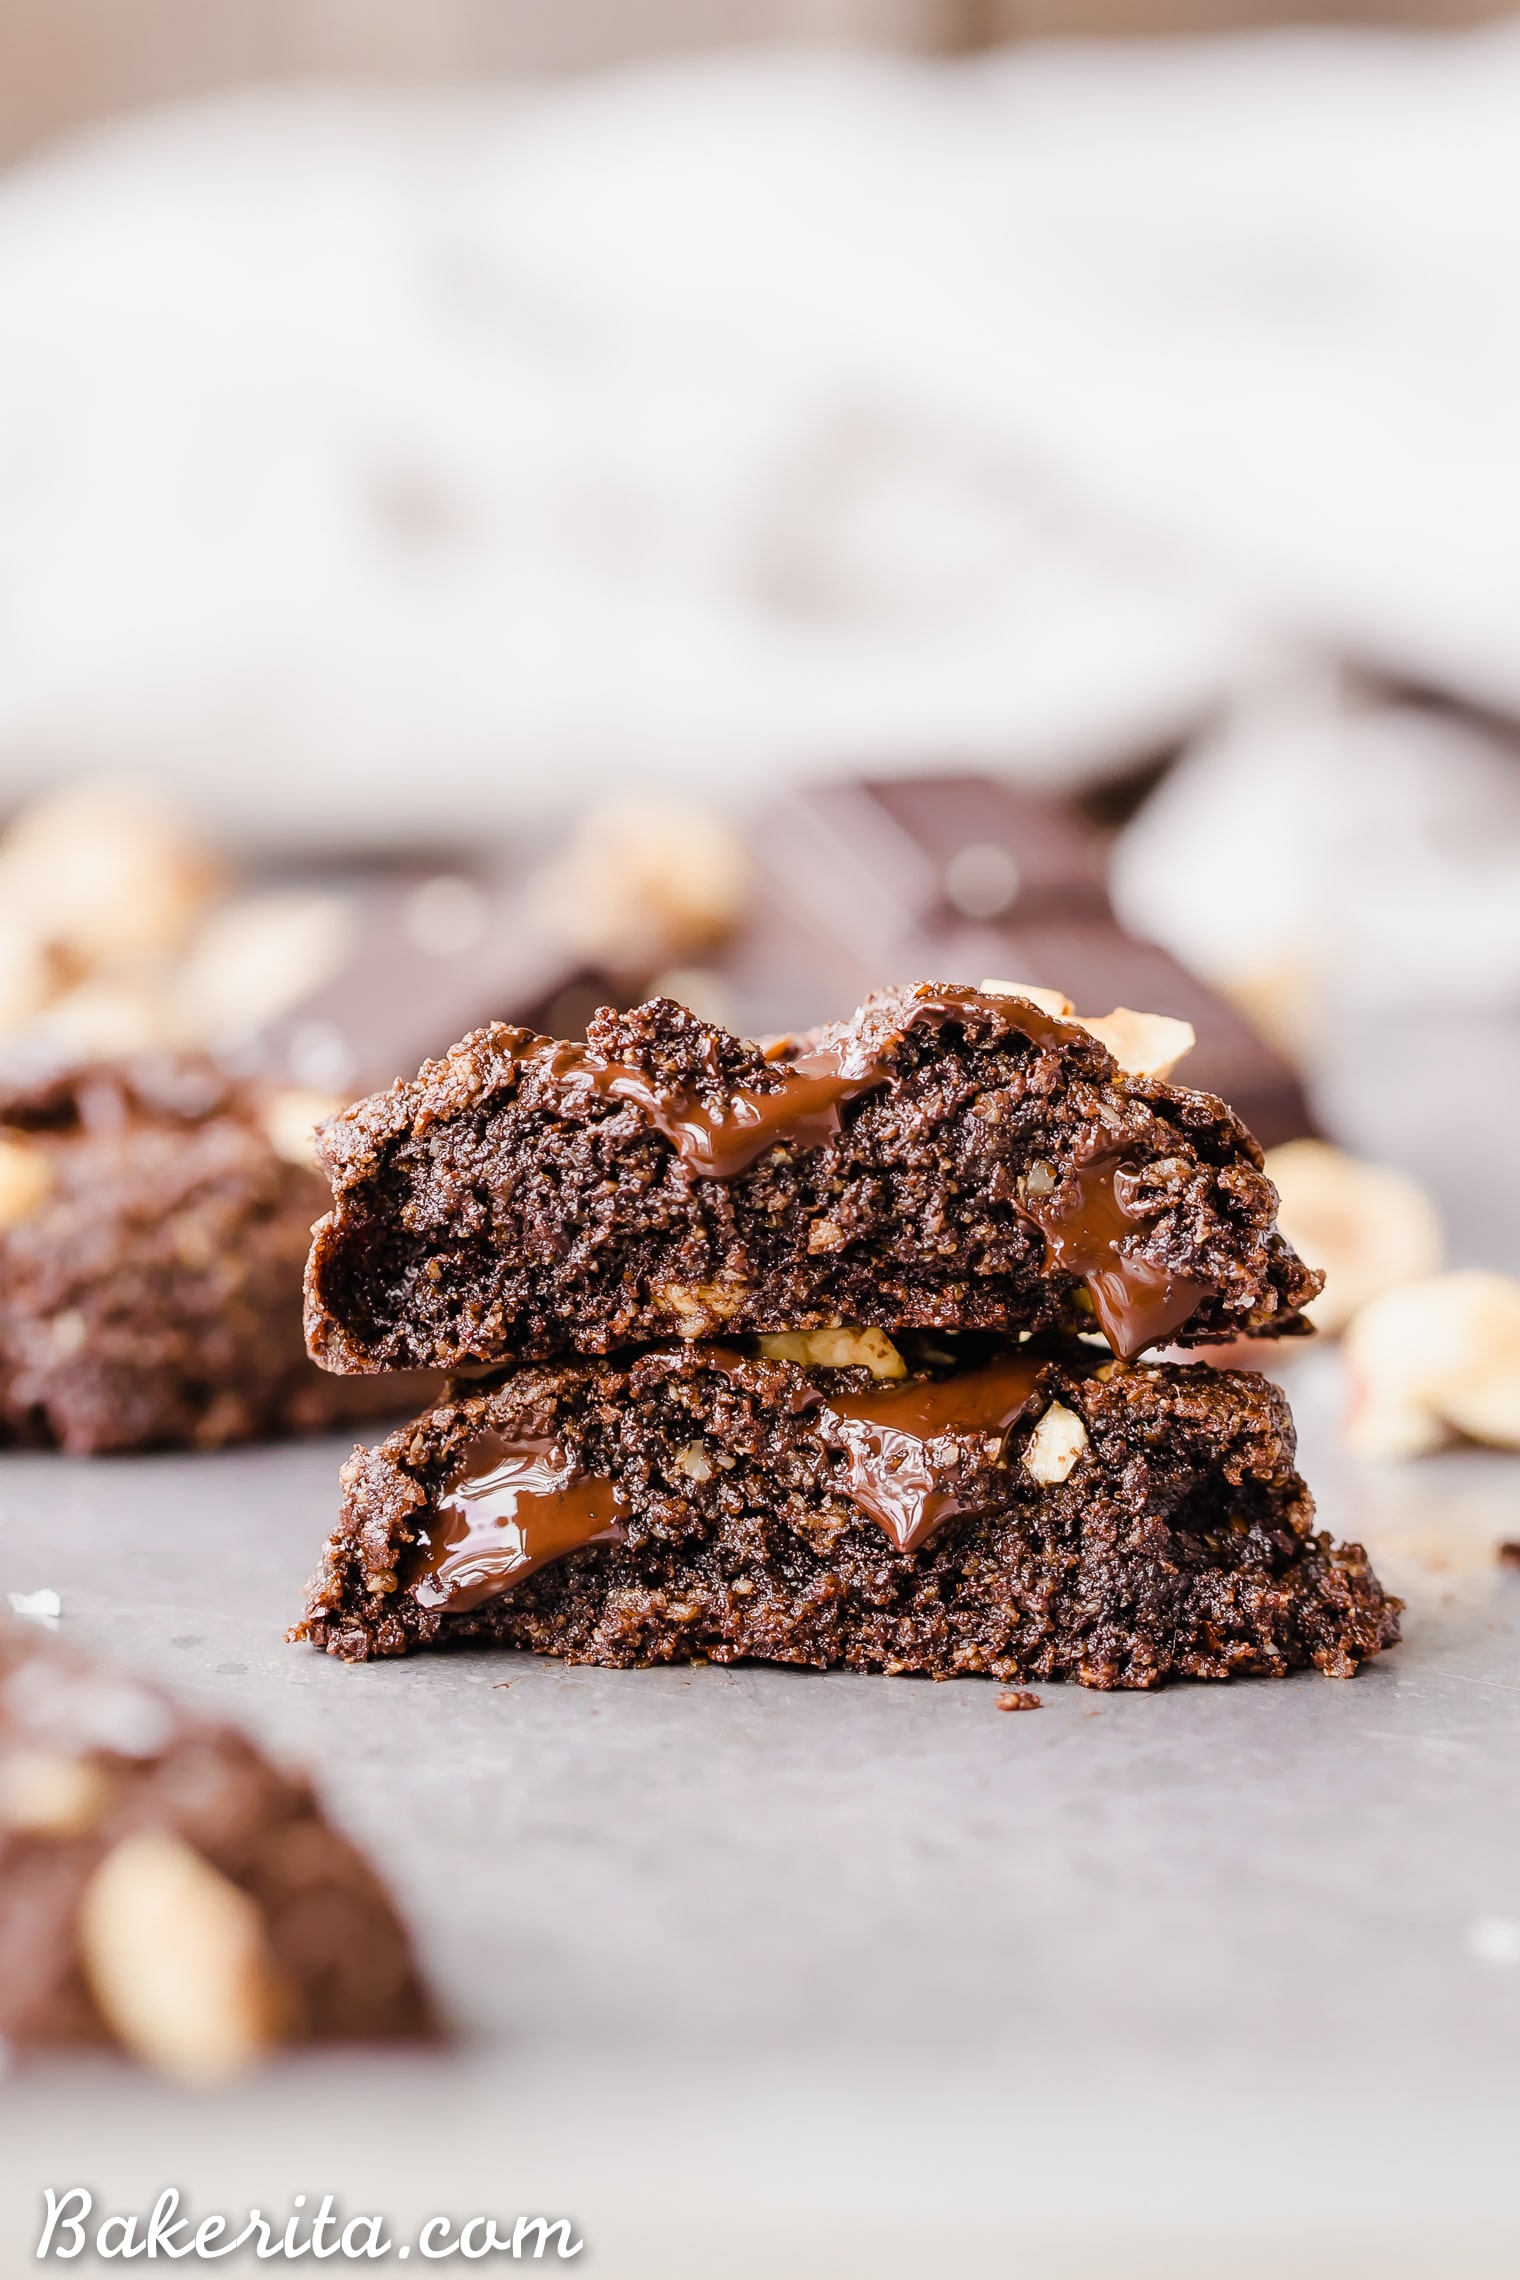 These Double Chocolate Hazelnut Cookies are soft, fudgy, and incredibly chocolatey! These irresistible cookies are loaded with melty dark chocolate chunks and crunchy hazelnuts, and you'd never guess they're gluten-free, paleo, and vegan. 